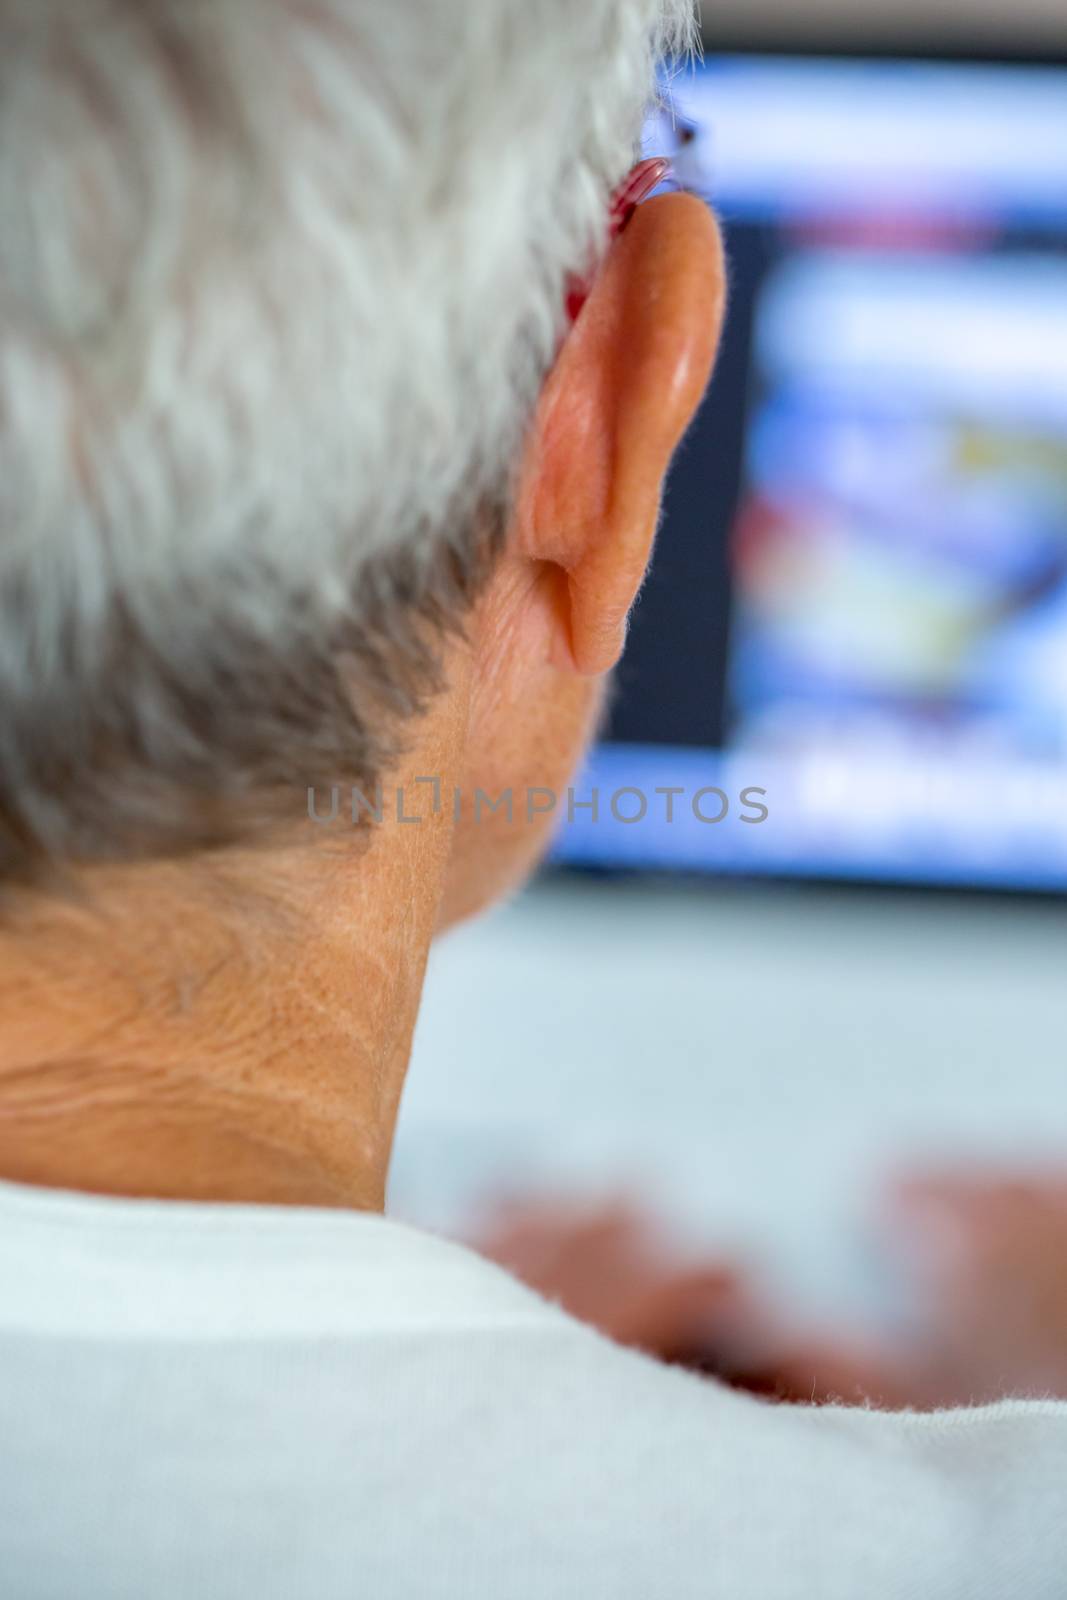 An old person with a pair of glasses in front of a laptop screen